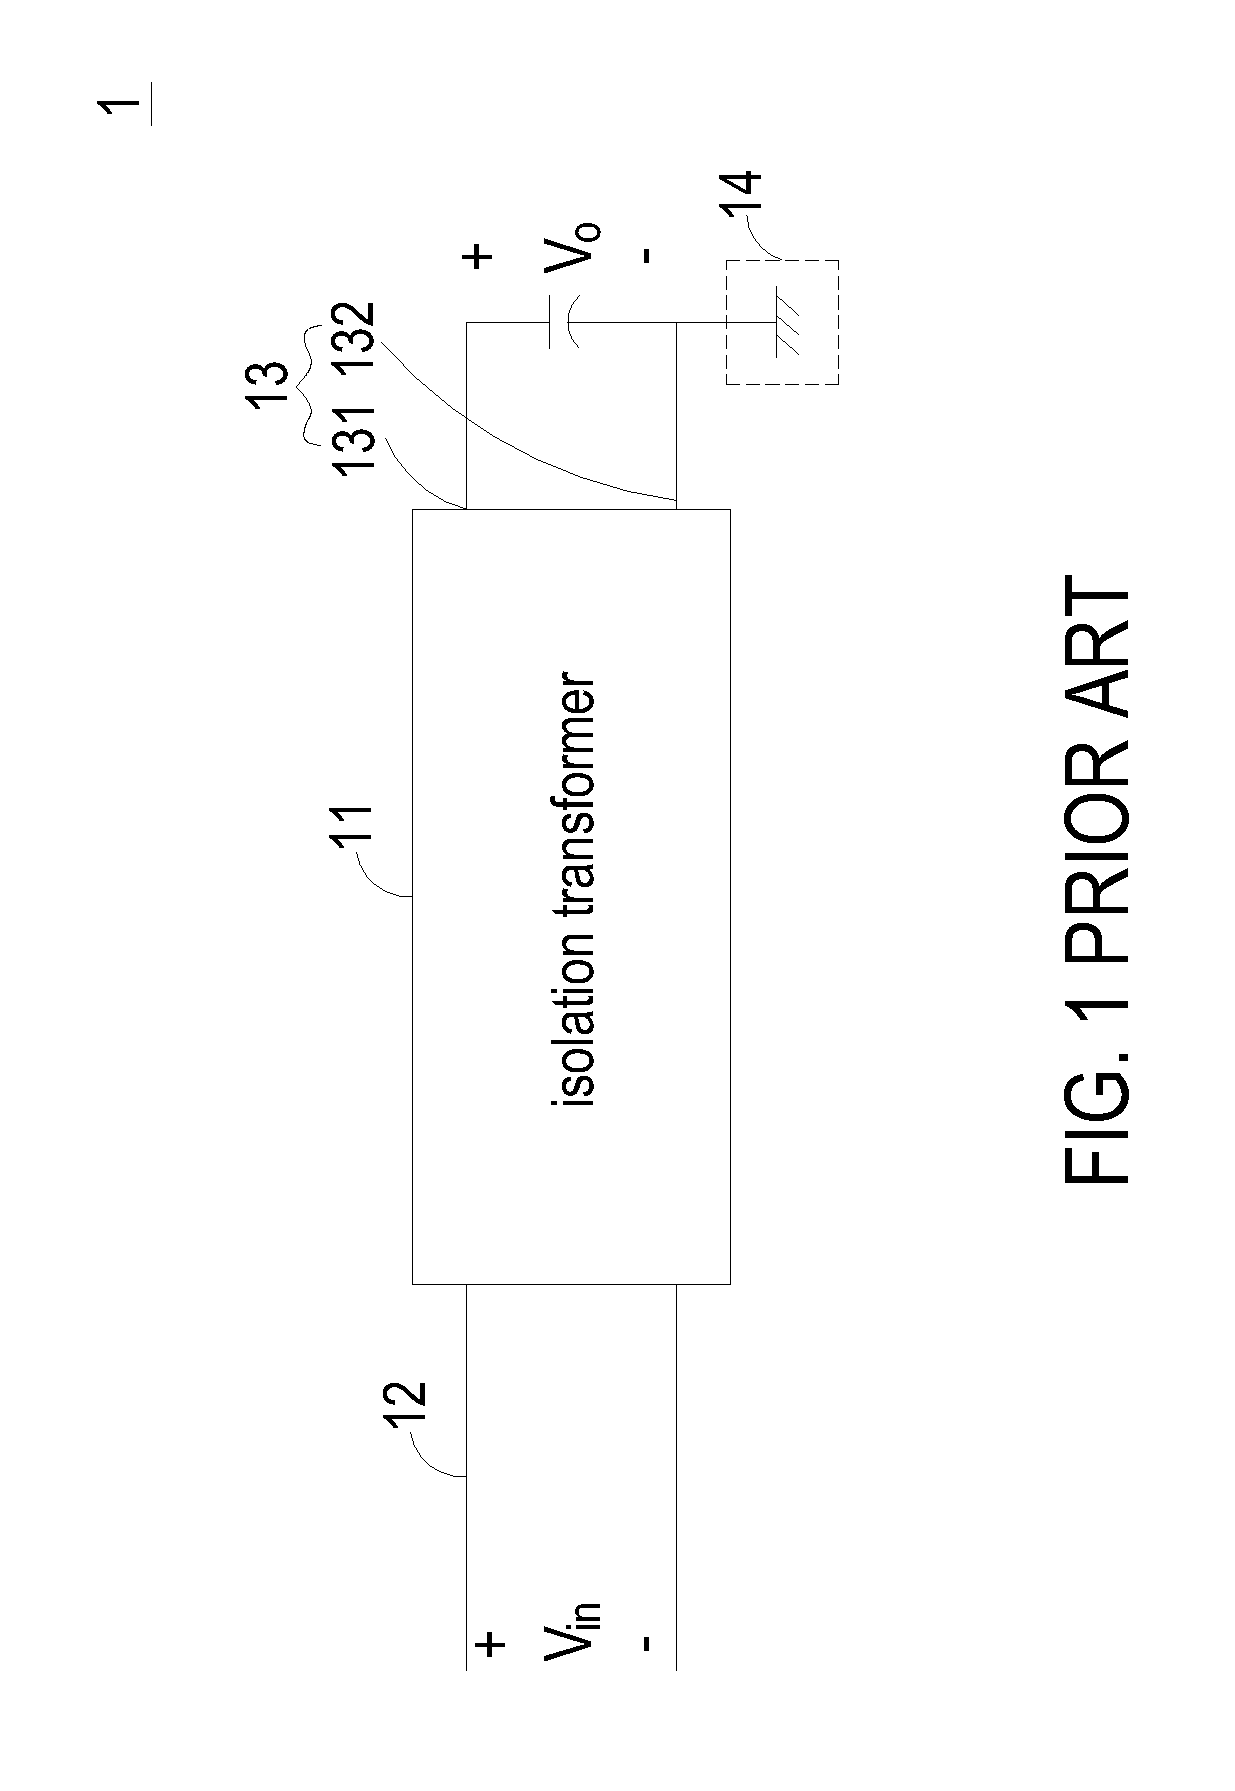 High-voltage power supply module and power supply system